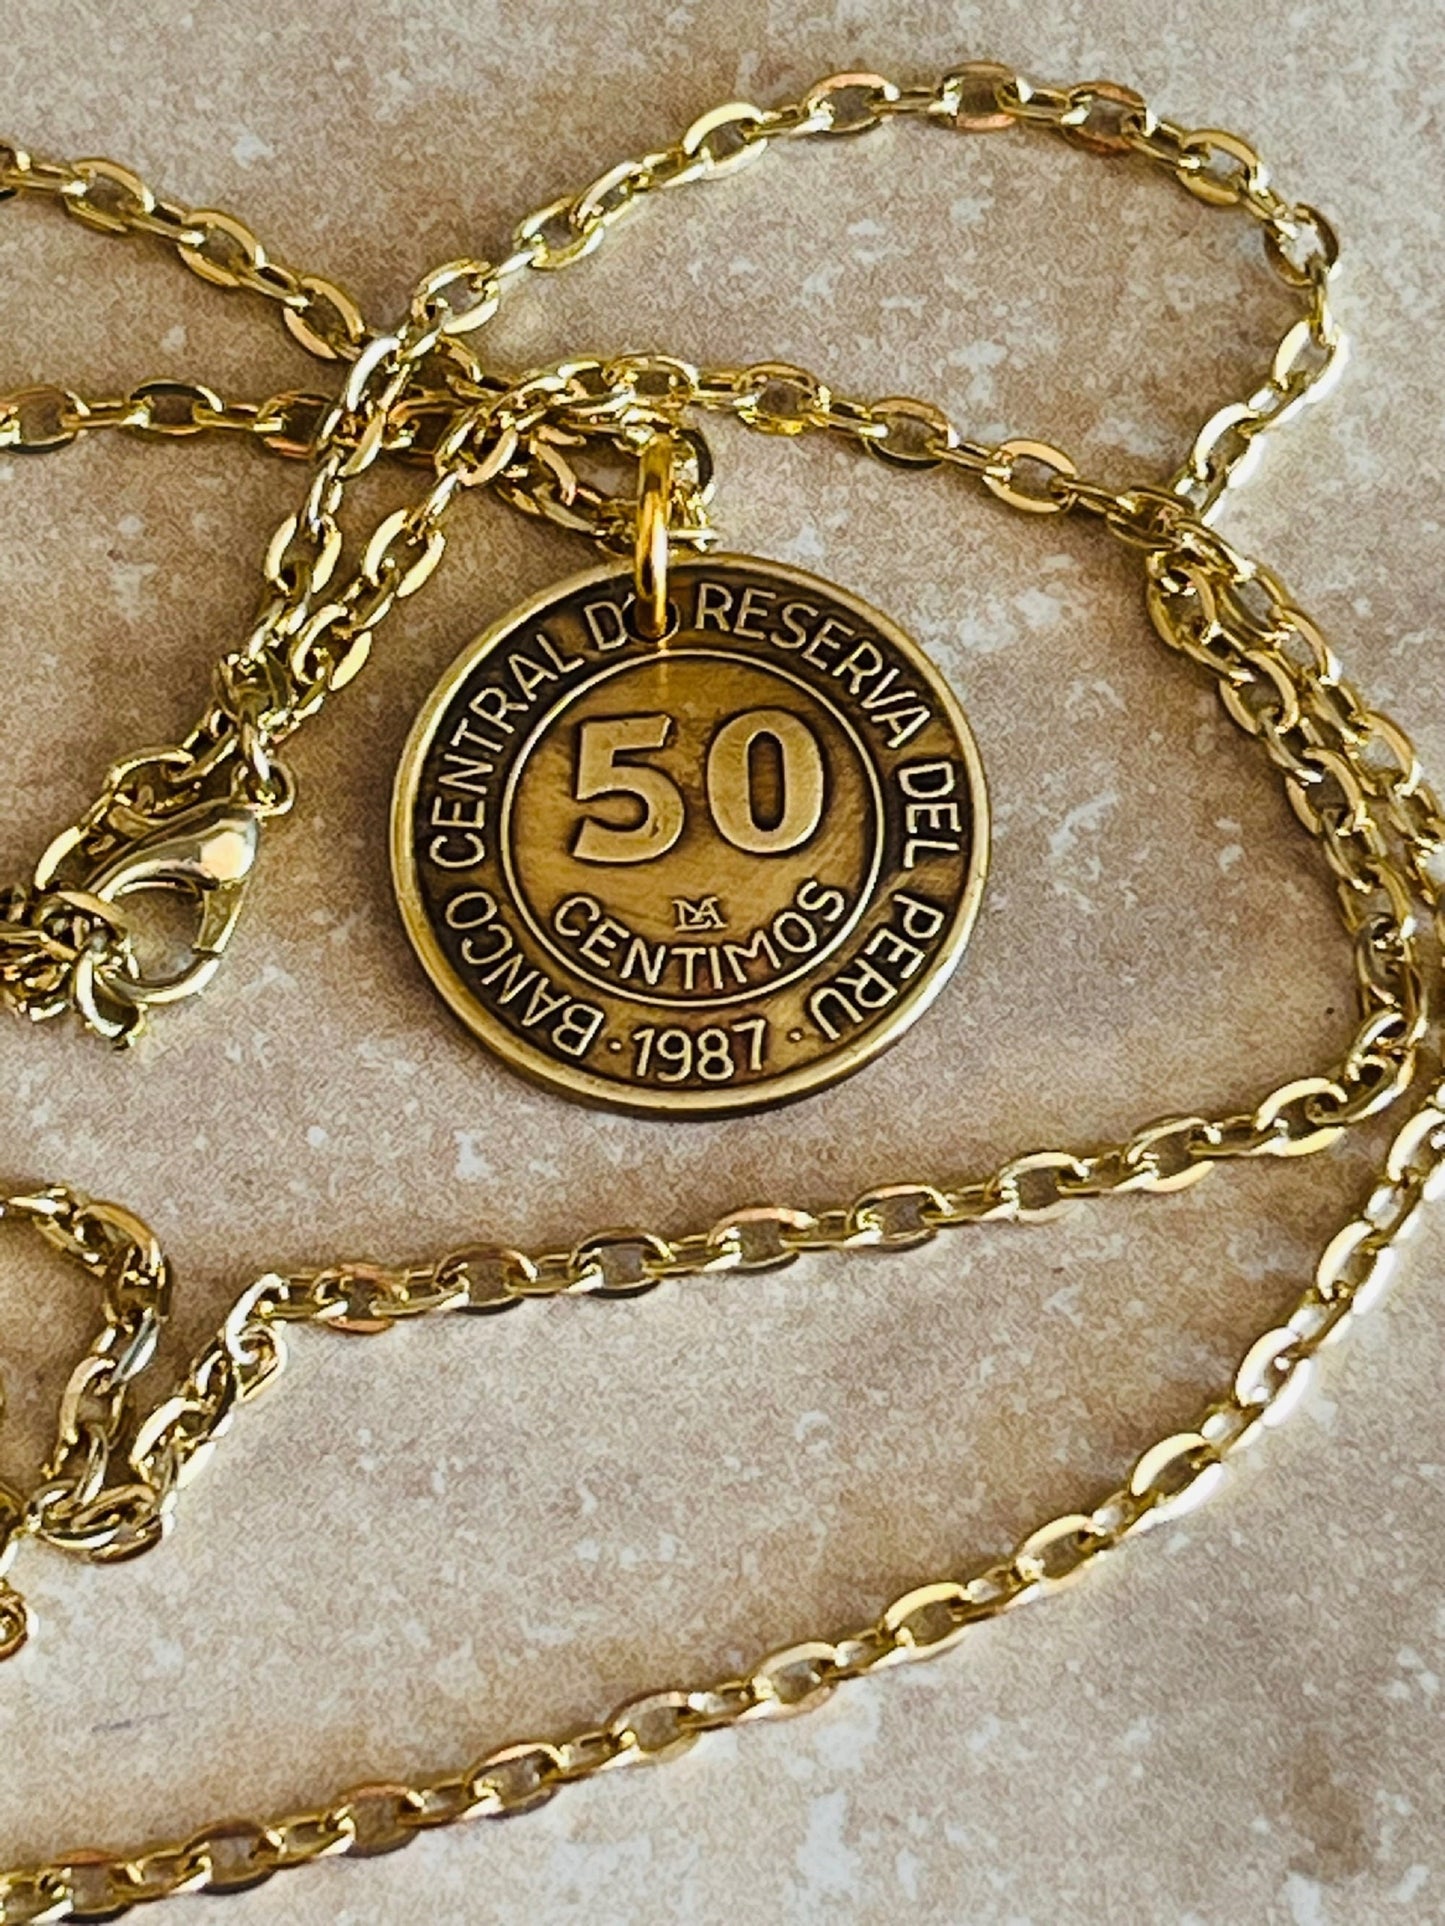 Peru Coin Pendant Peruvian 50 Centimos Personal Necklace Old Vintage Handmade Jewelry Gift Friend Charm For Him Her World Coin Collector